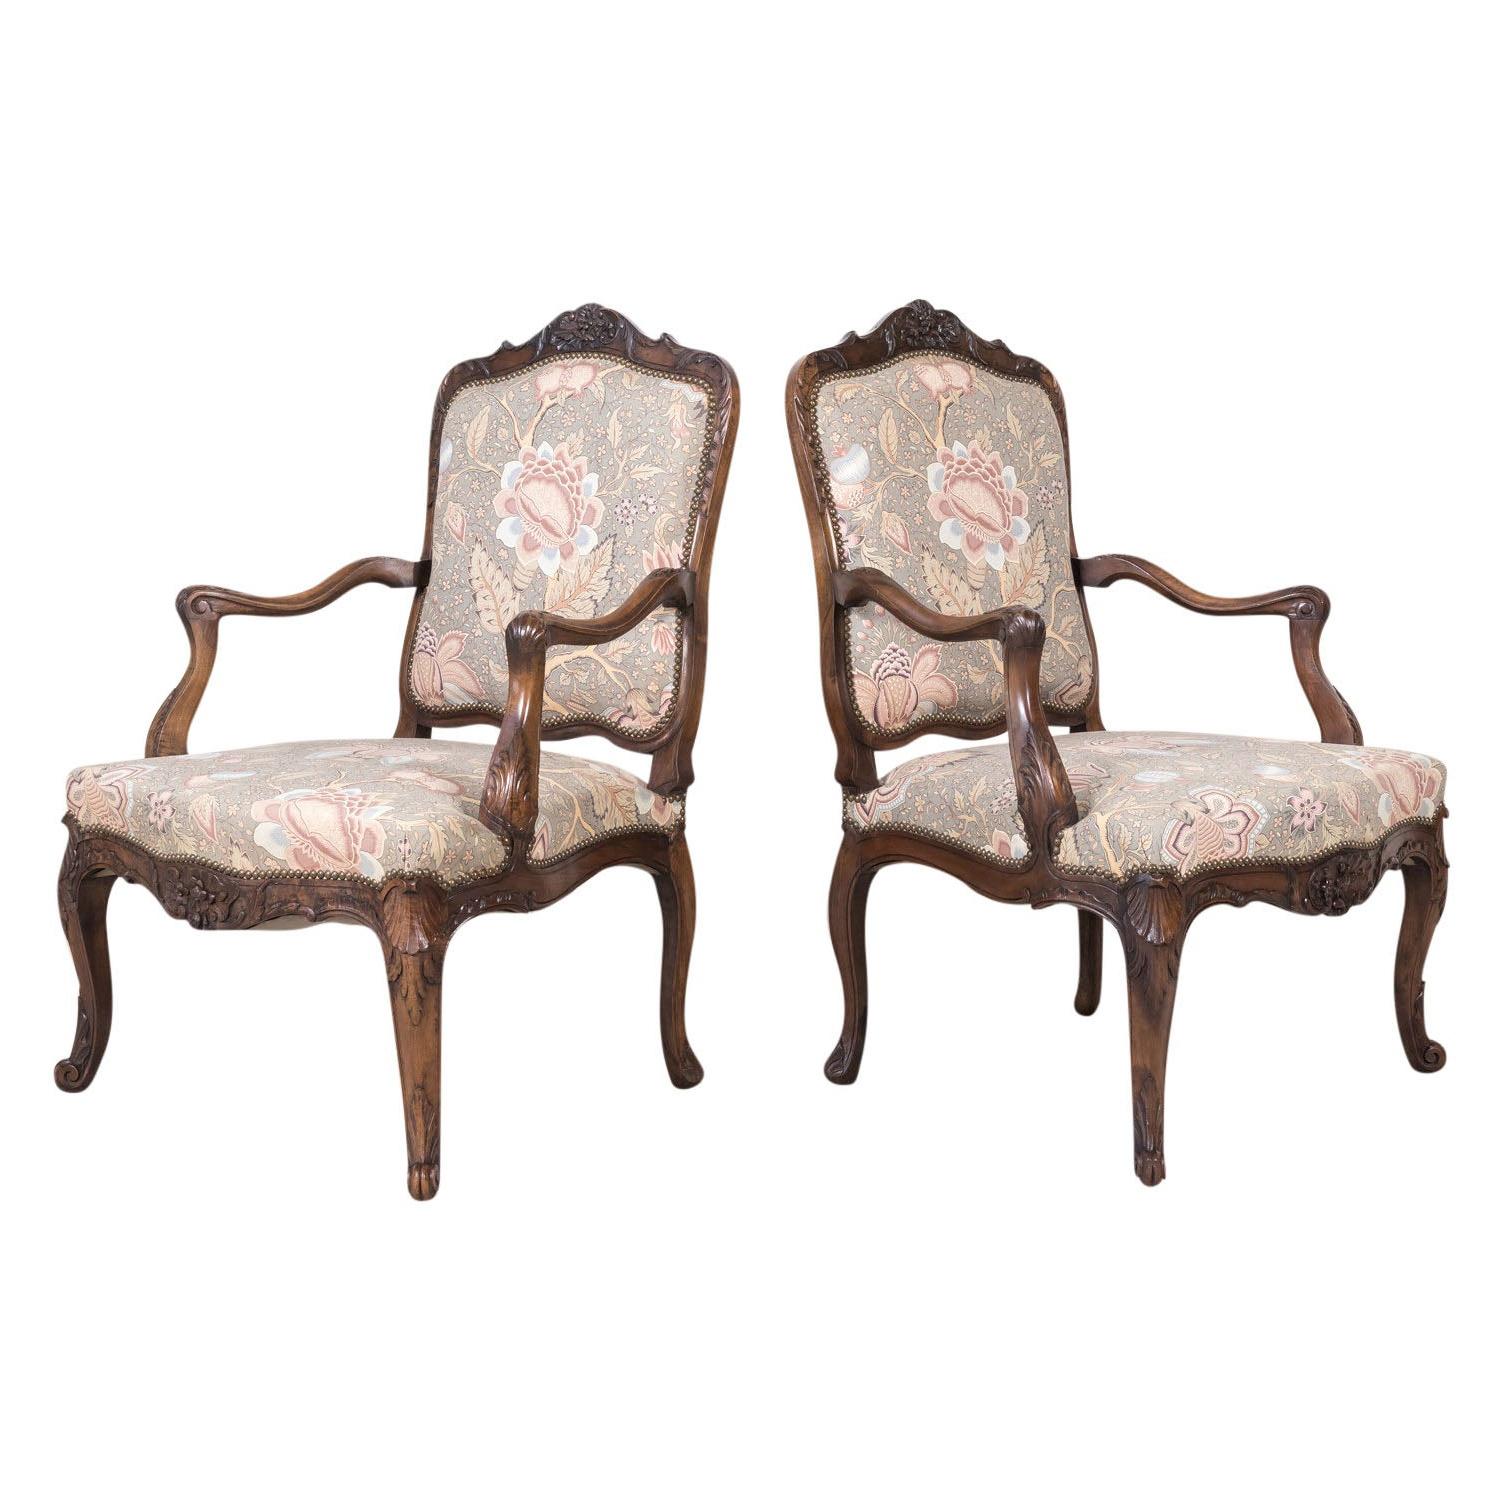 Fine Pair of 18th Century French Louis XV Period Carved Walnut Fauteuils